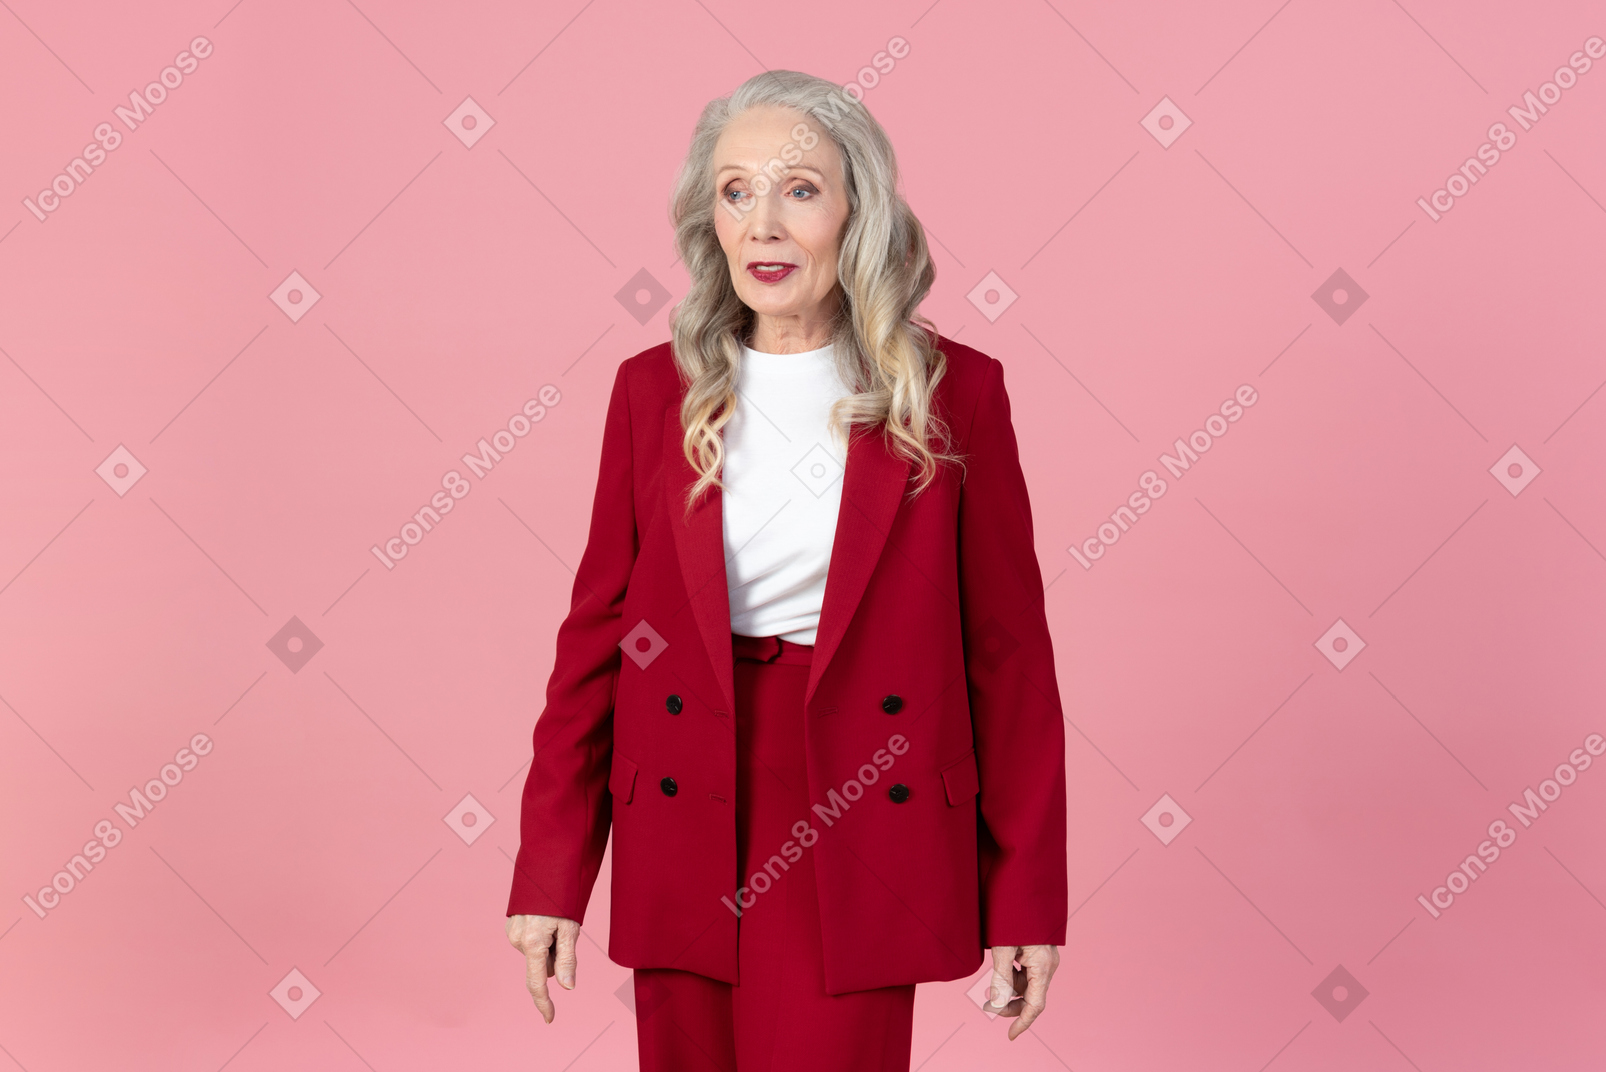 Fashionable old woman looking involved in thoughts